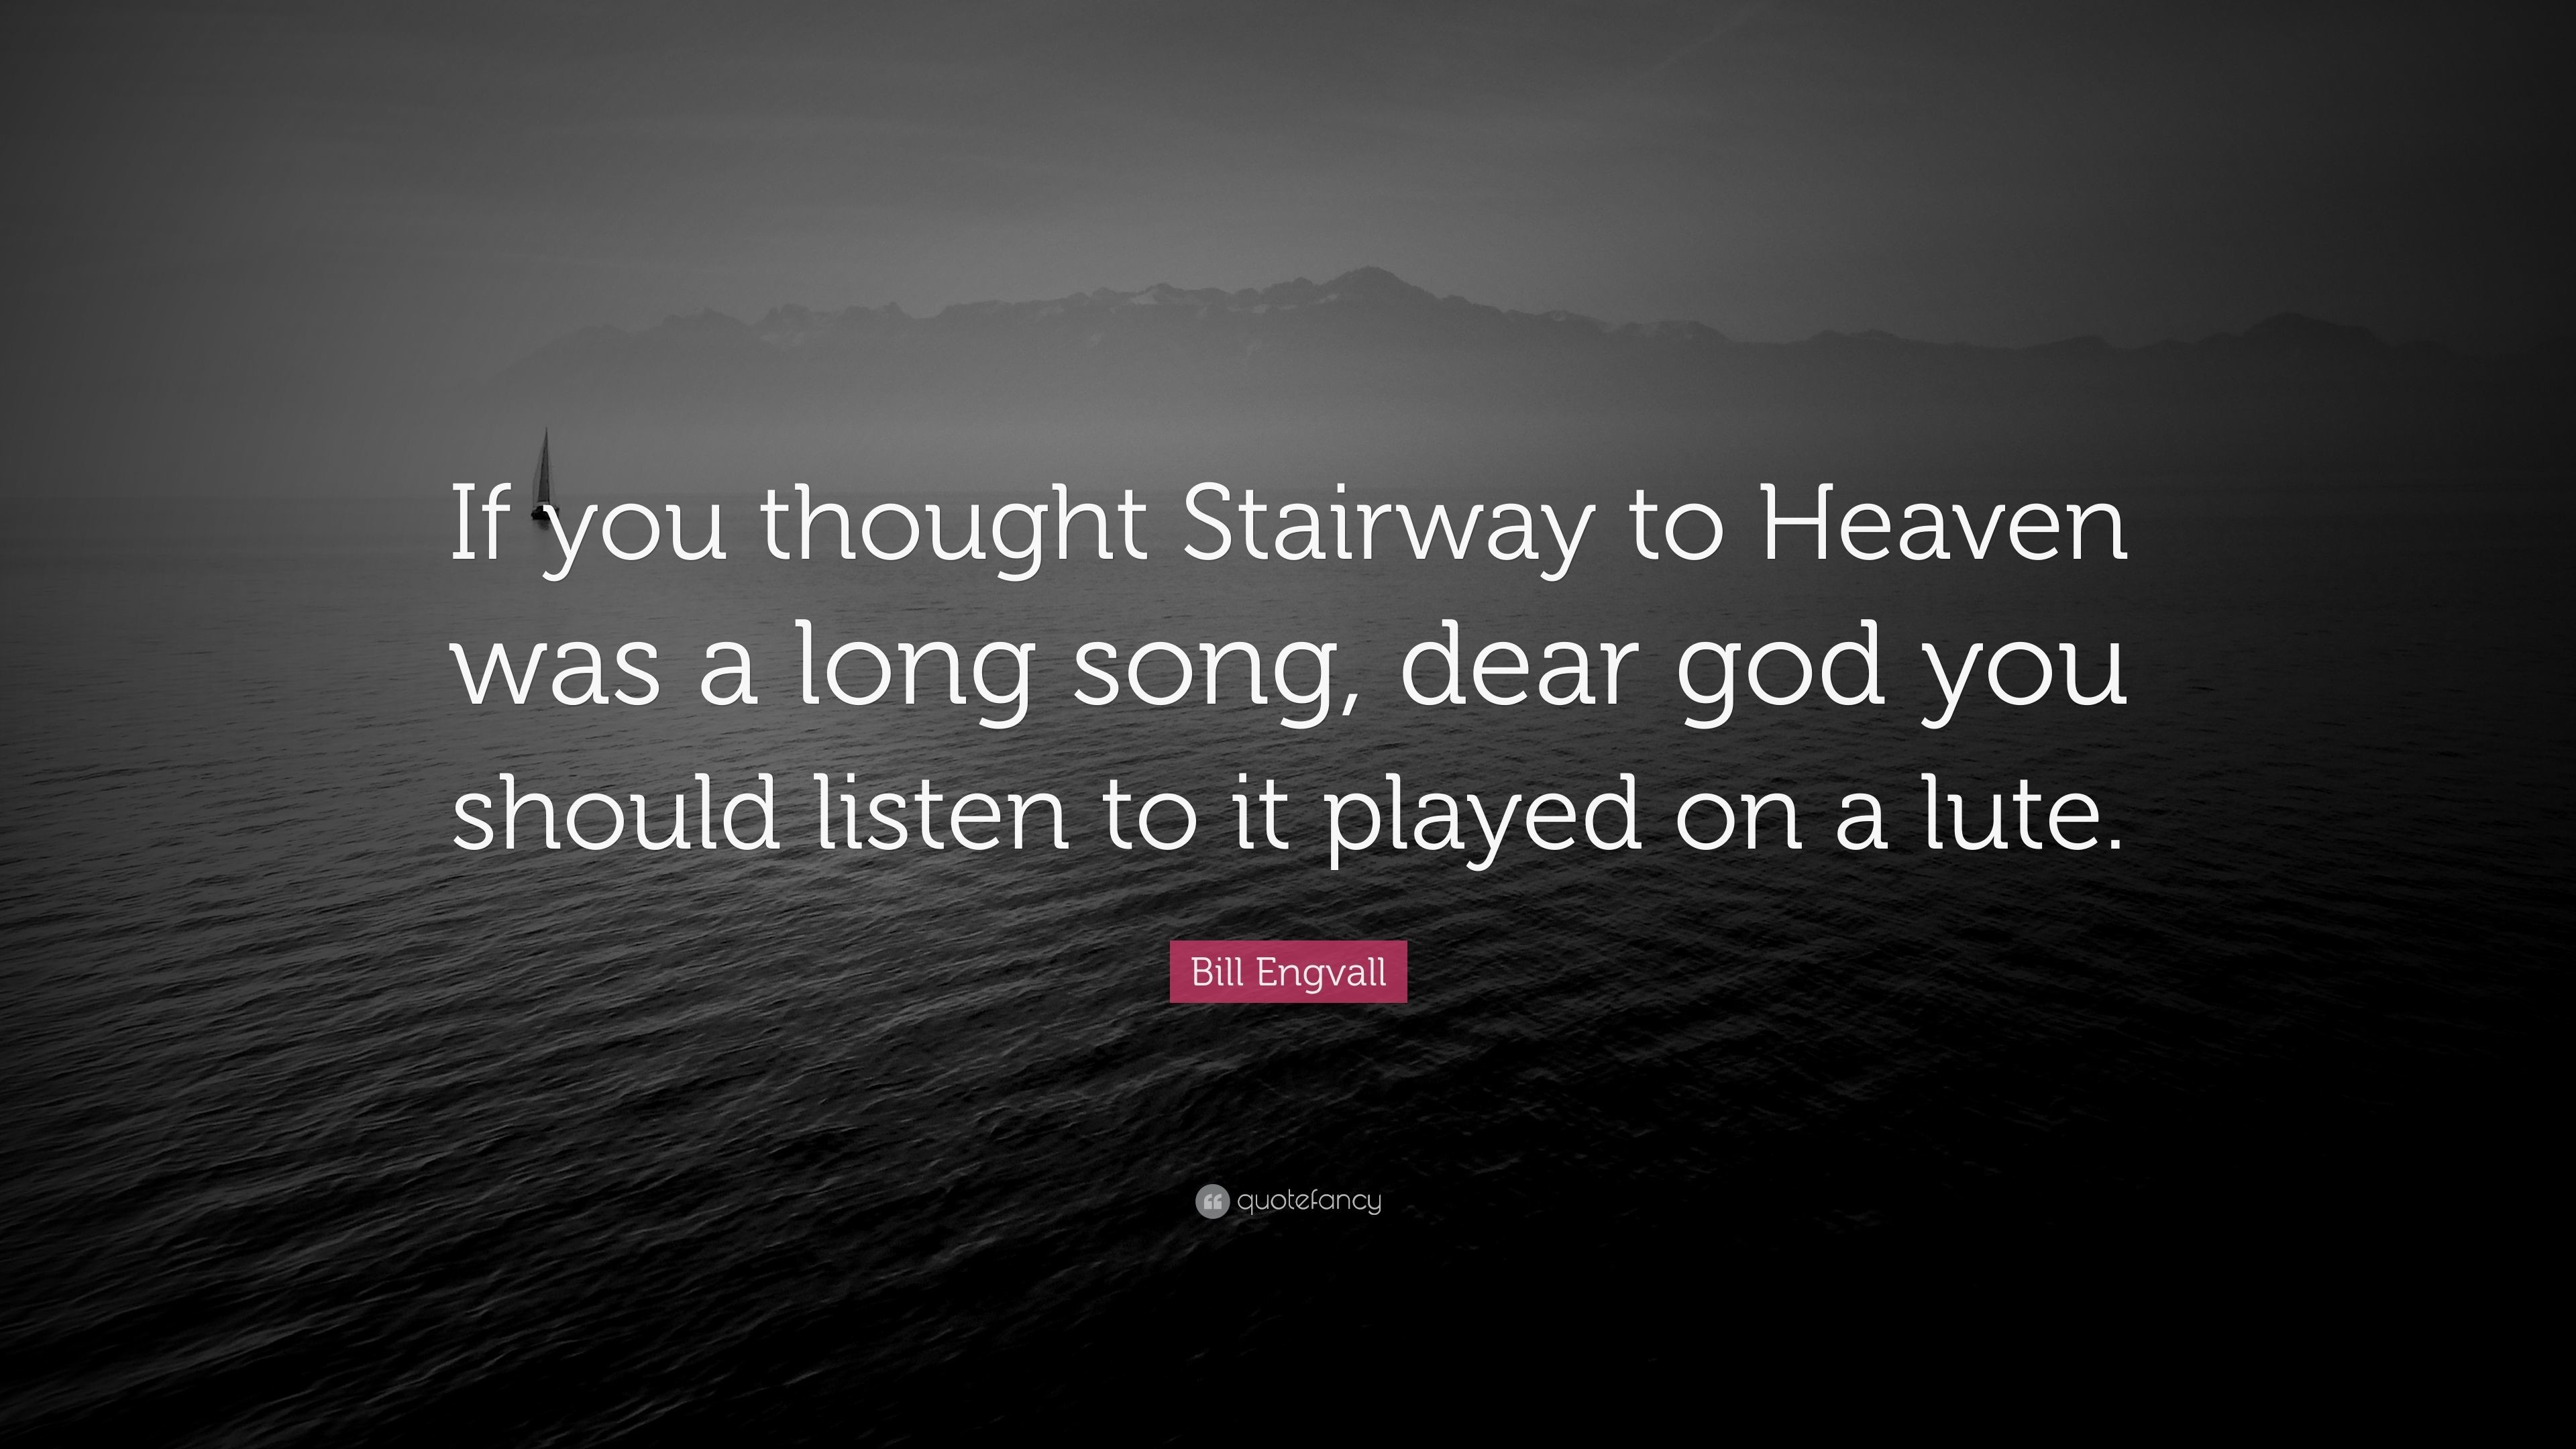 3840x2160 Bill Engvall Quote: “If you thought Stairway to Heaven was a long song,